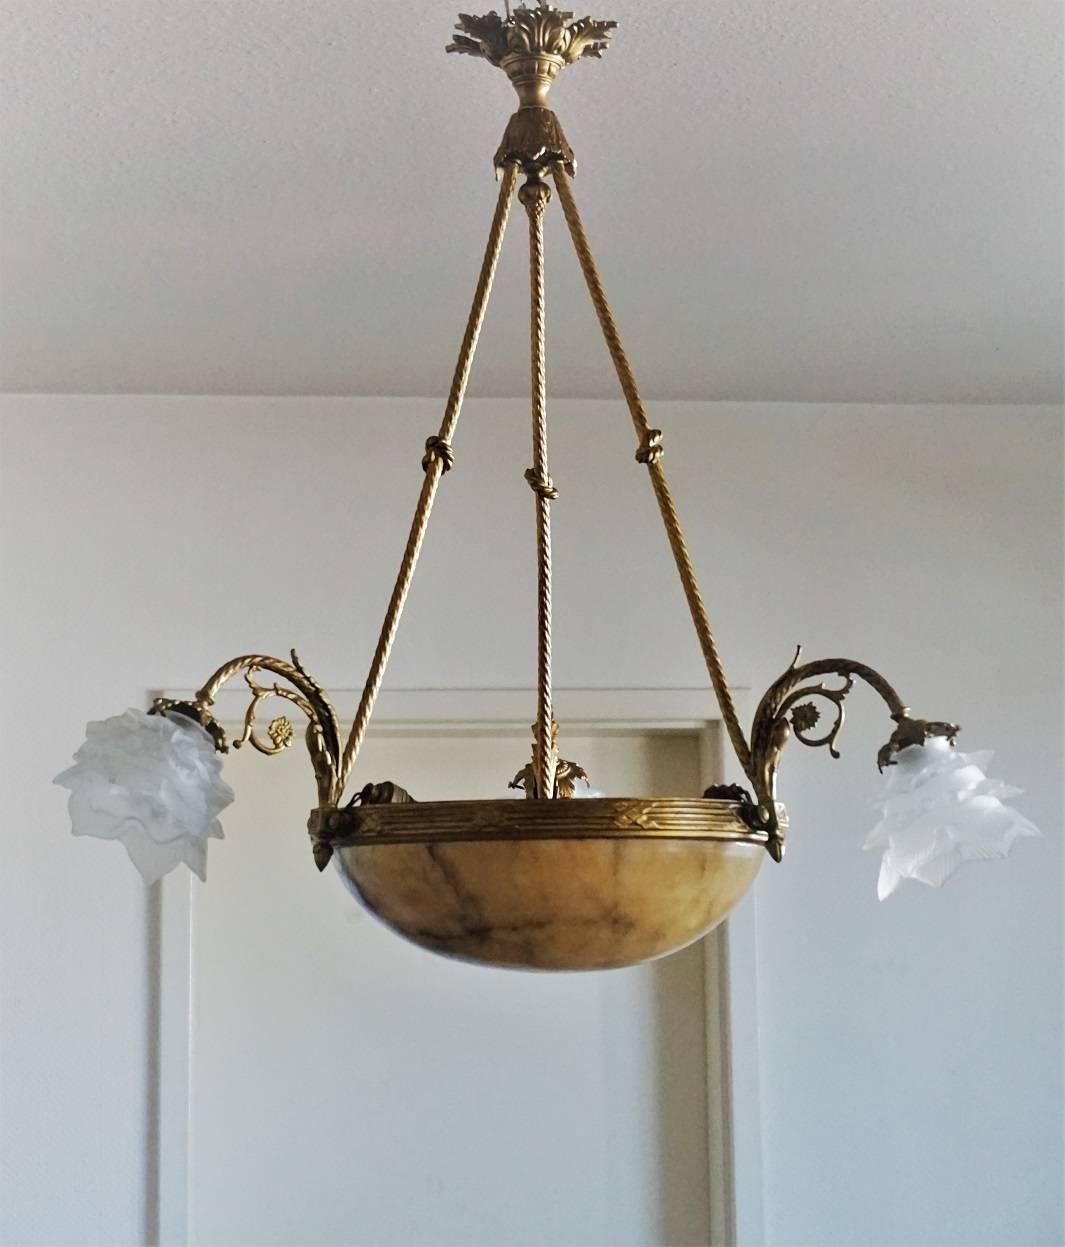 Large French Art Deco gilt bronze chandelier with alabaster bowl shade suspended from three gilt bronze arms with knotted rope shape. Three curved arms richly ornate with frosted glass flower shades, early 20th century.
Number of lights: Six French